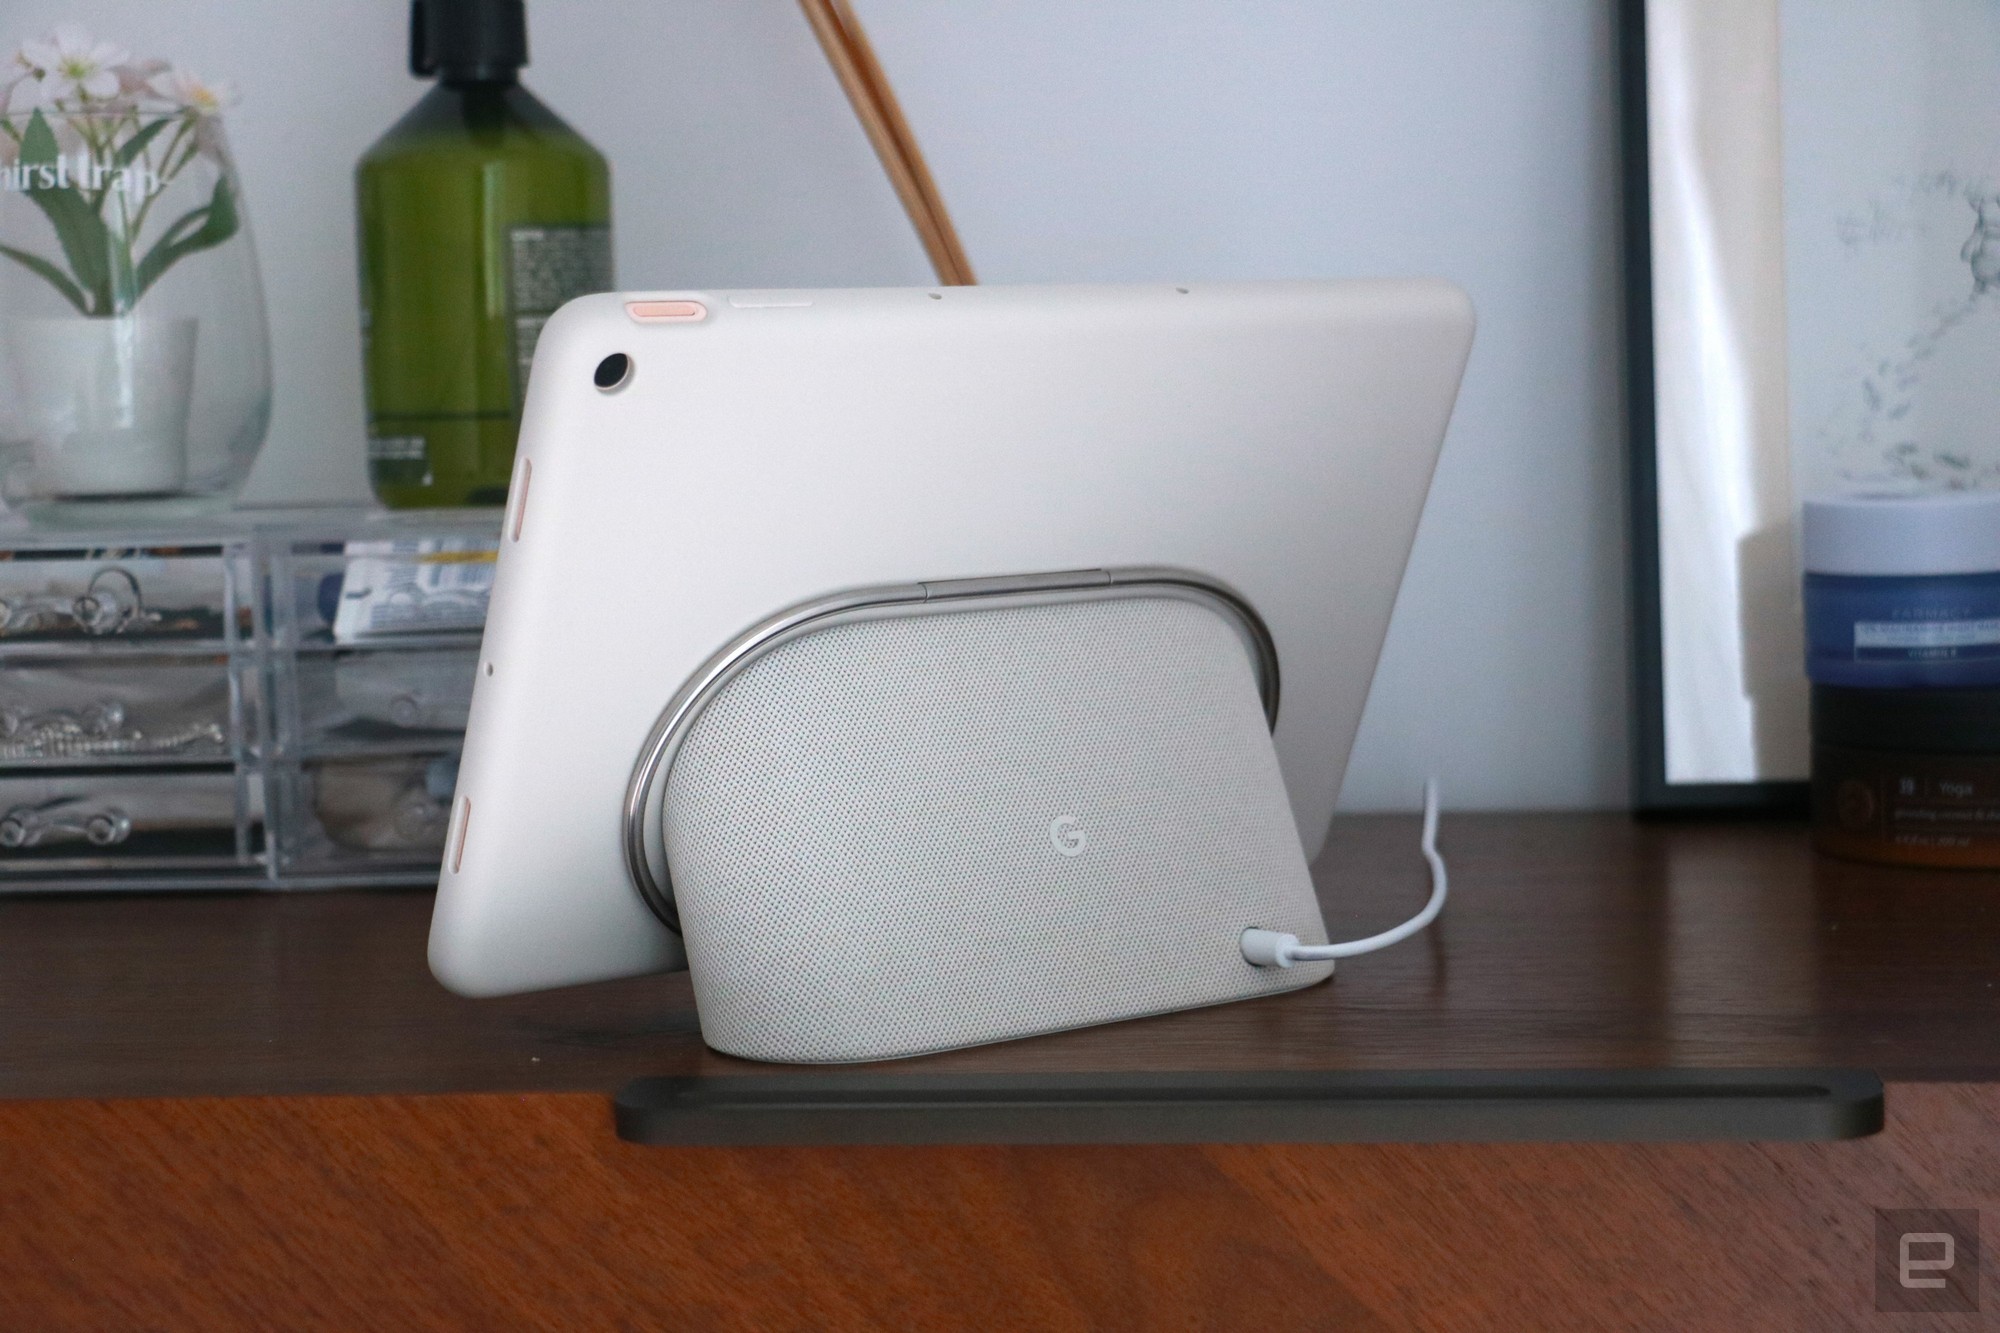 The Pixel Tablet with its protective case on and docked on the speaker base. Its silver kickstand, which is folded in, is a ring that circles the speaker.